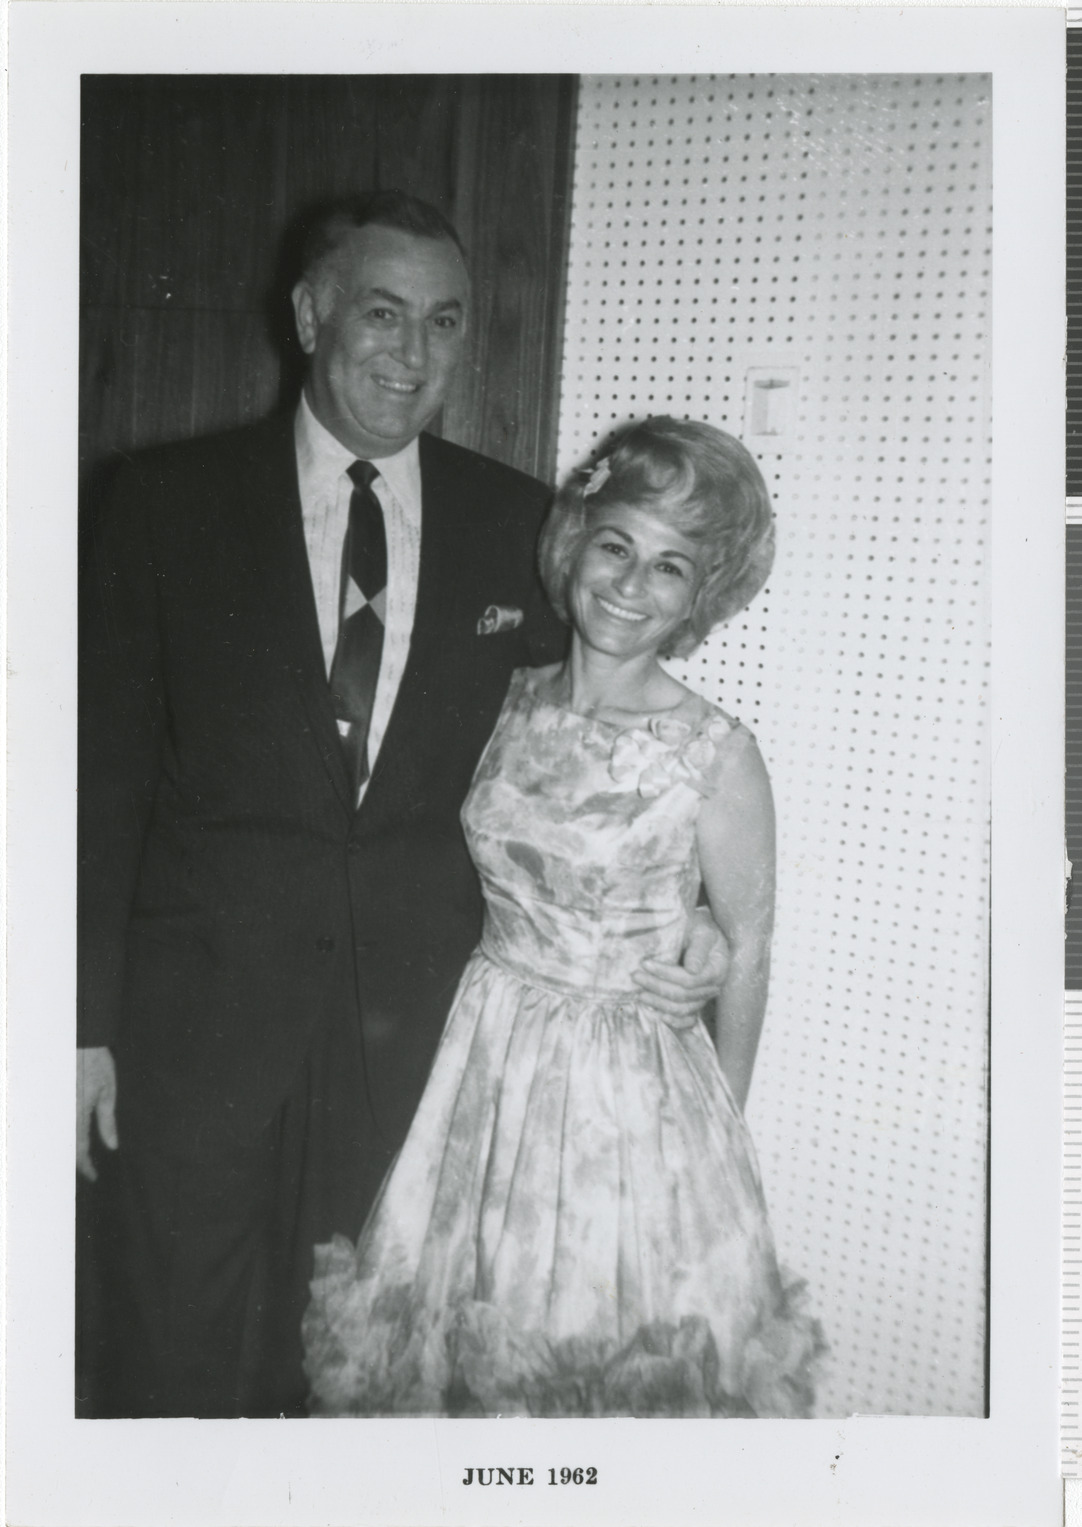 Photograph of Jack Entratter and Eileen Brookman, June 1962